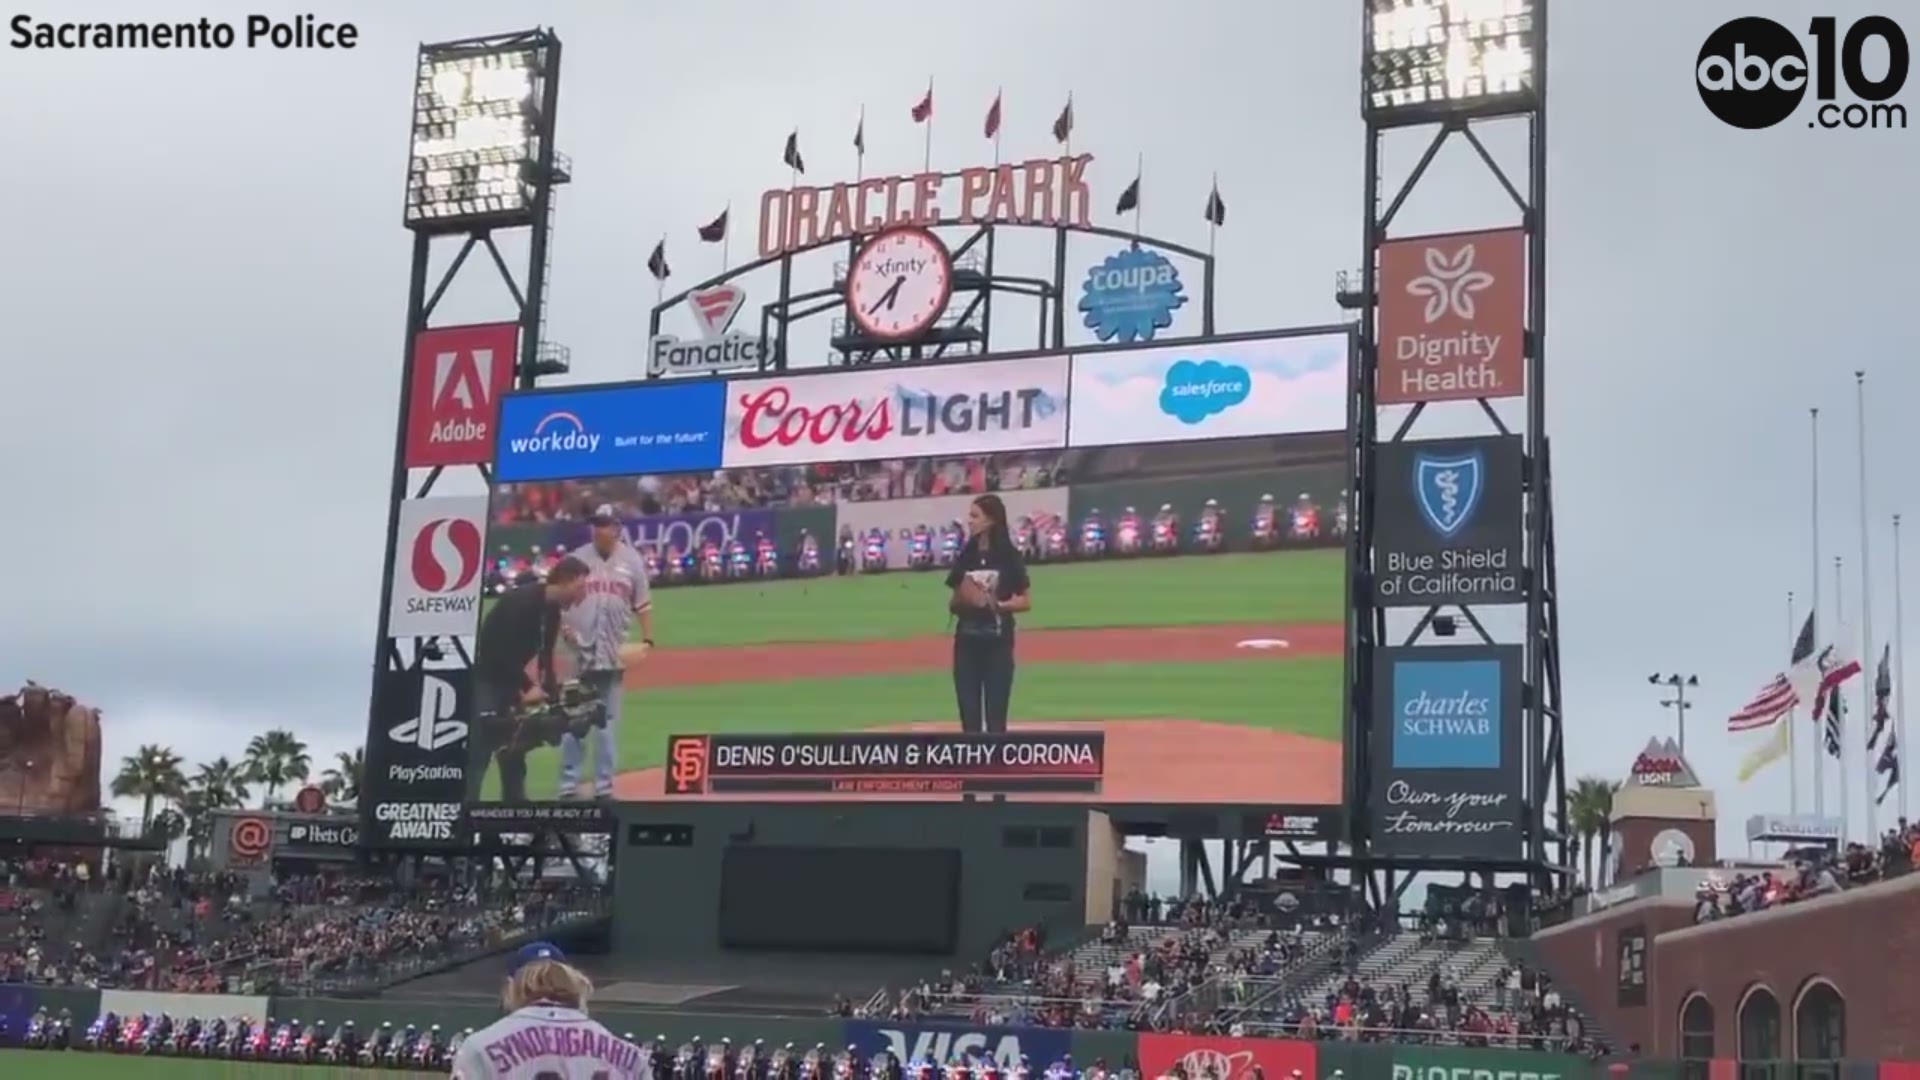 Officers O'Sullivan and Corona were honored by the San Francisco Giants during their Law Enforcement Appreciation night Thursday, July 18, 2019.